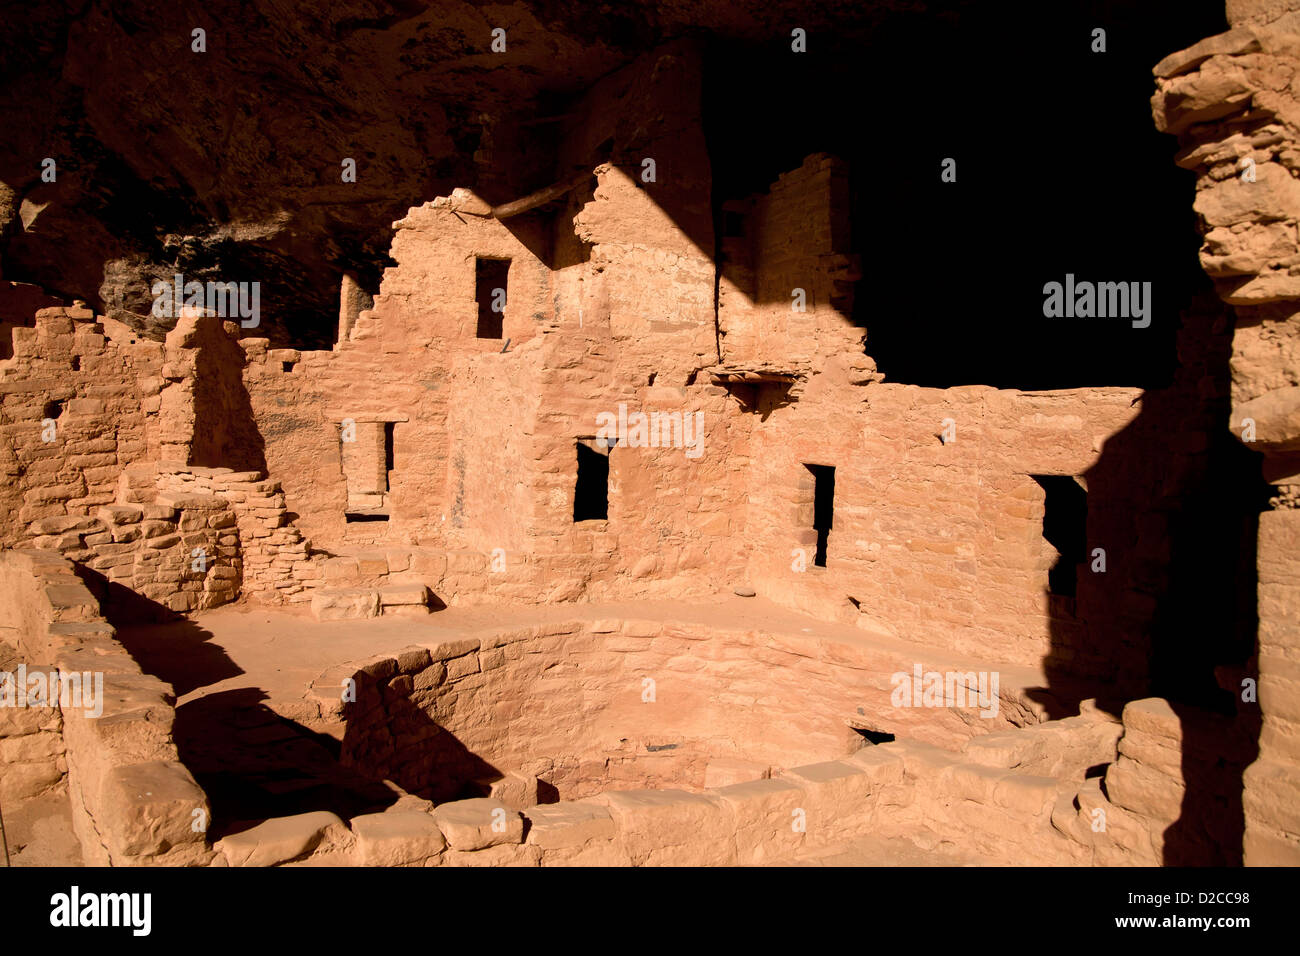 Spruce Tree House, cliff dwelling of pre-Columbian Anasazi indians and UNESCO World Heritage site, Mesa Verde National Park USA Stock Photo